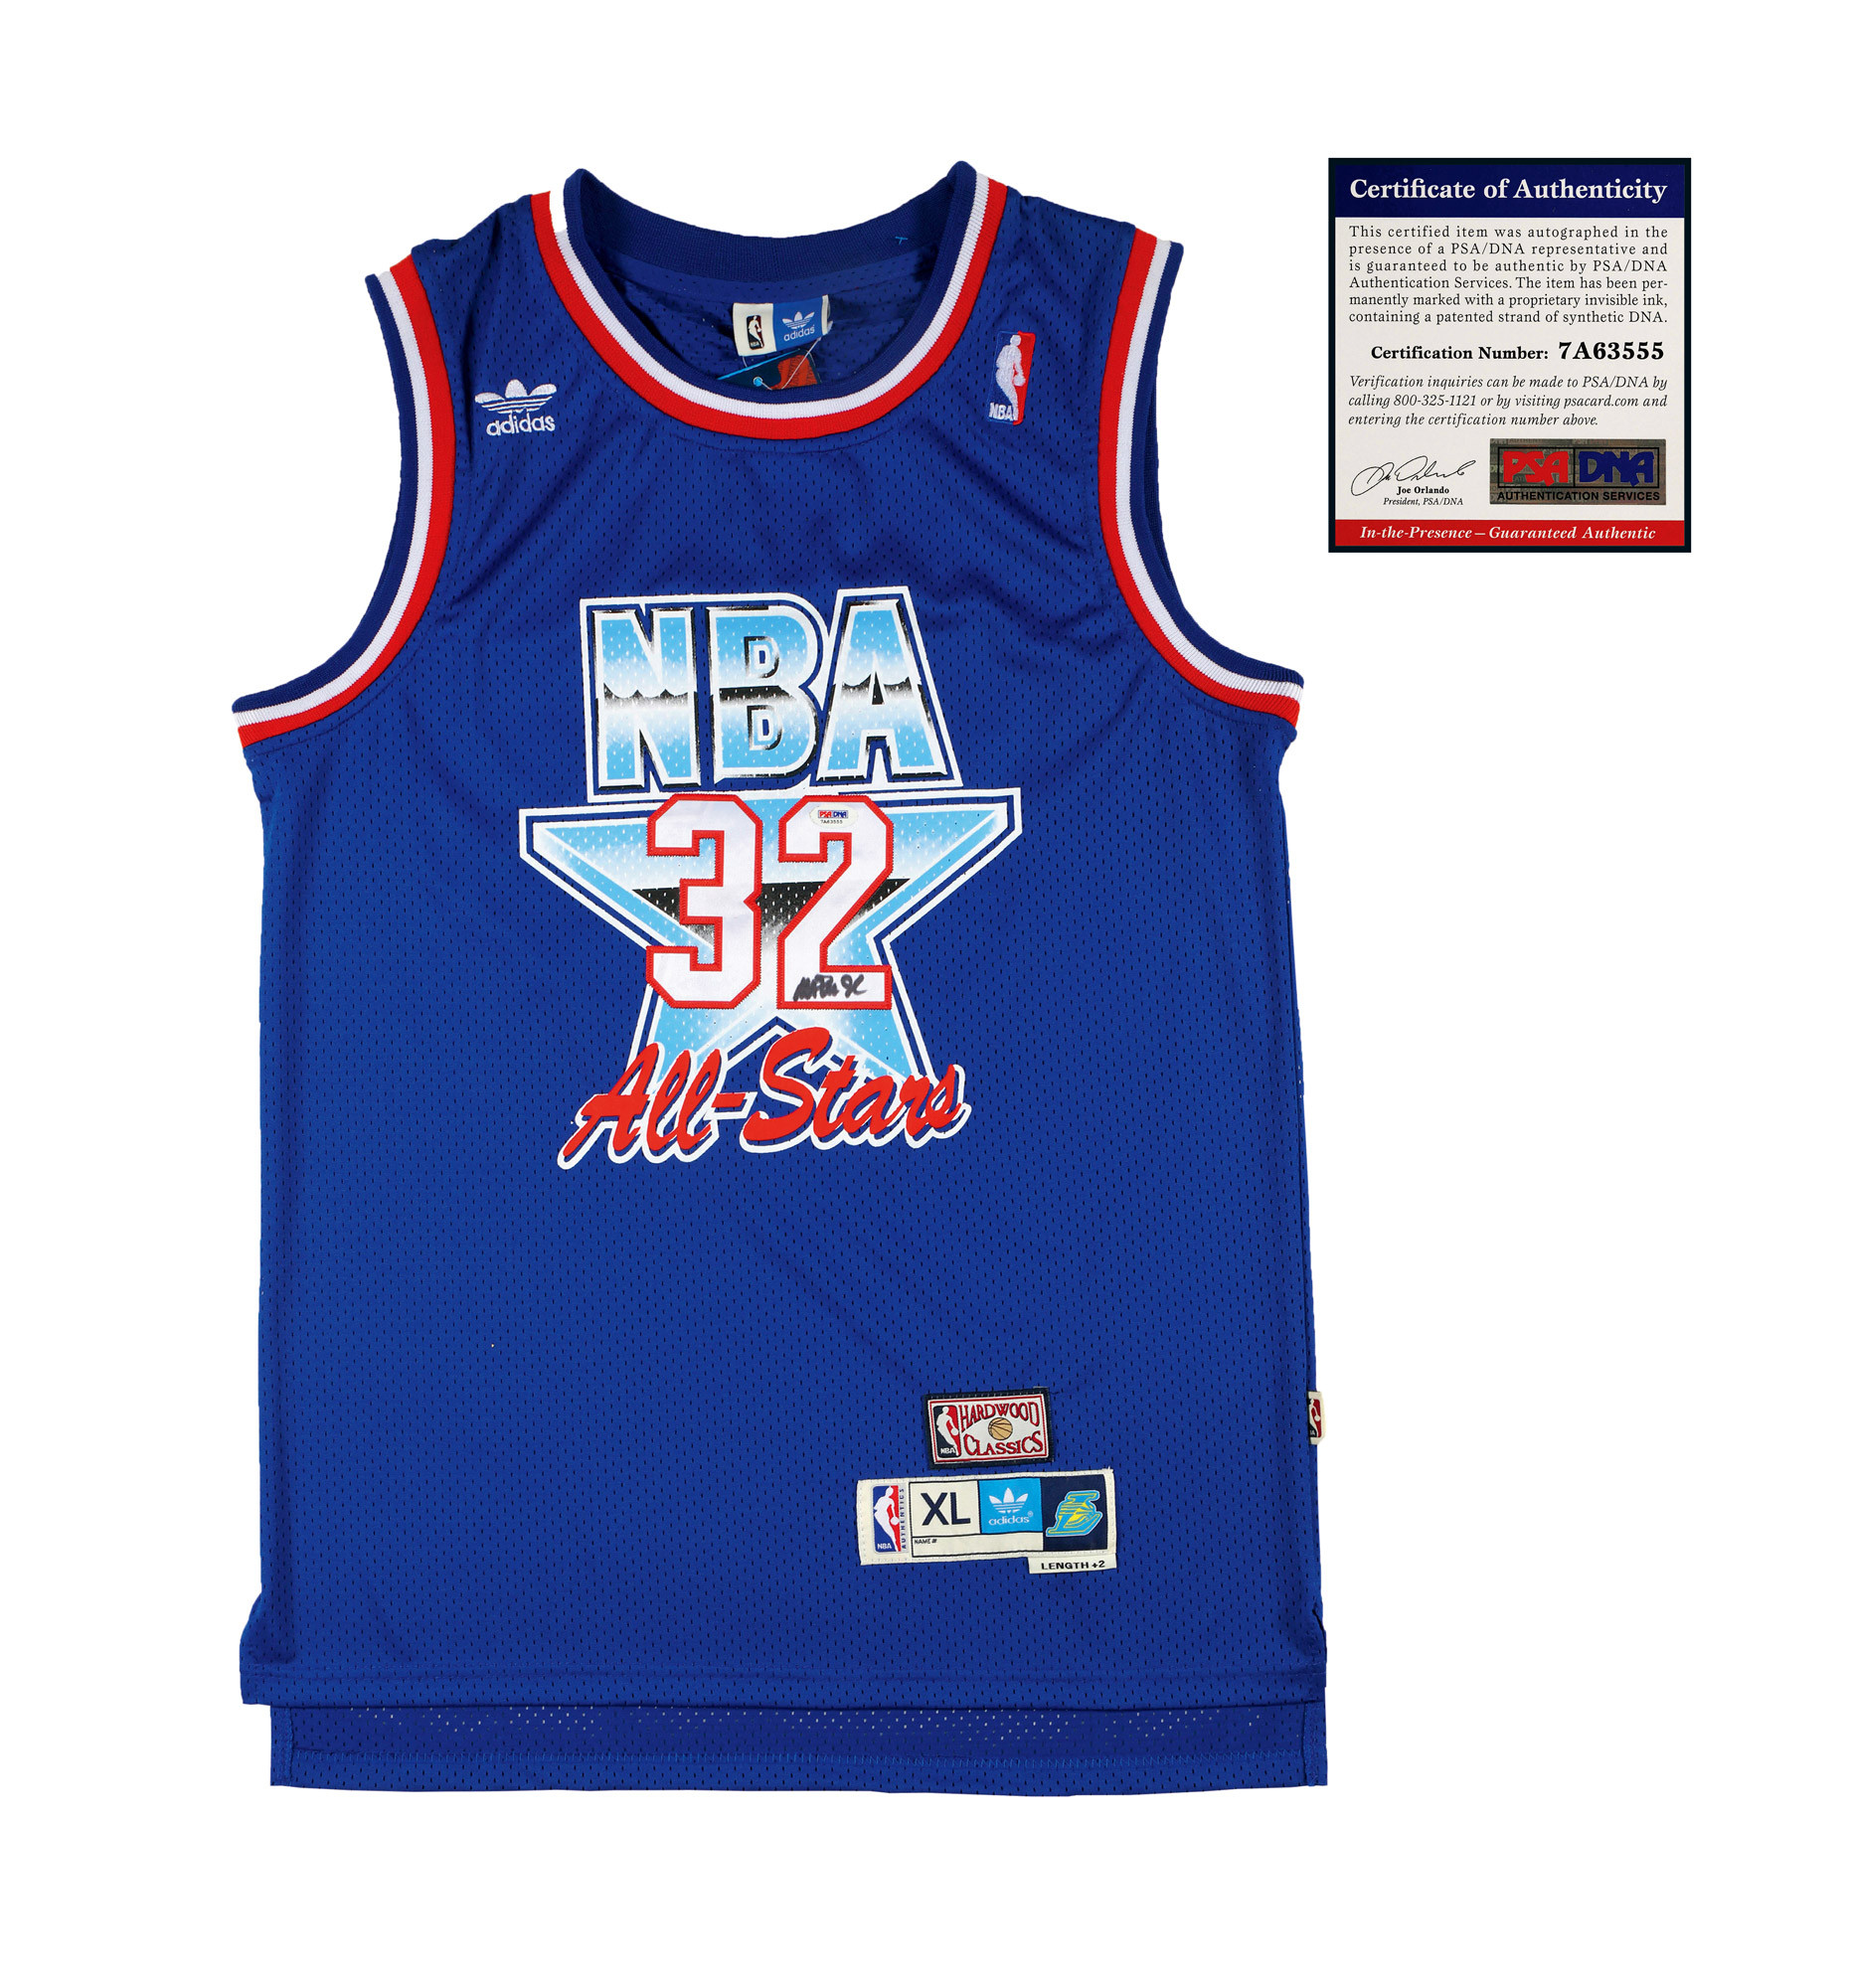 The All-Star team jersey of Magic Johnson, the legendary NBA star, with certificate